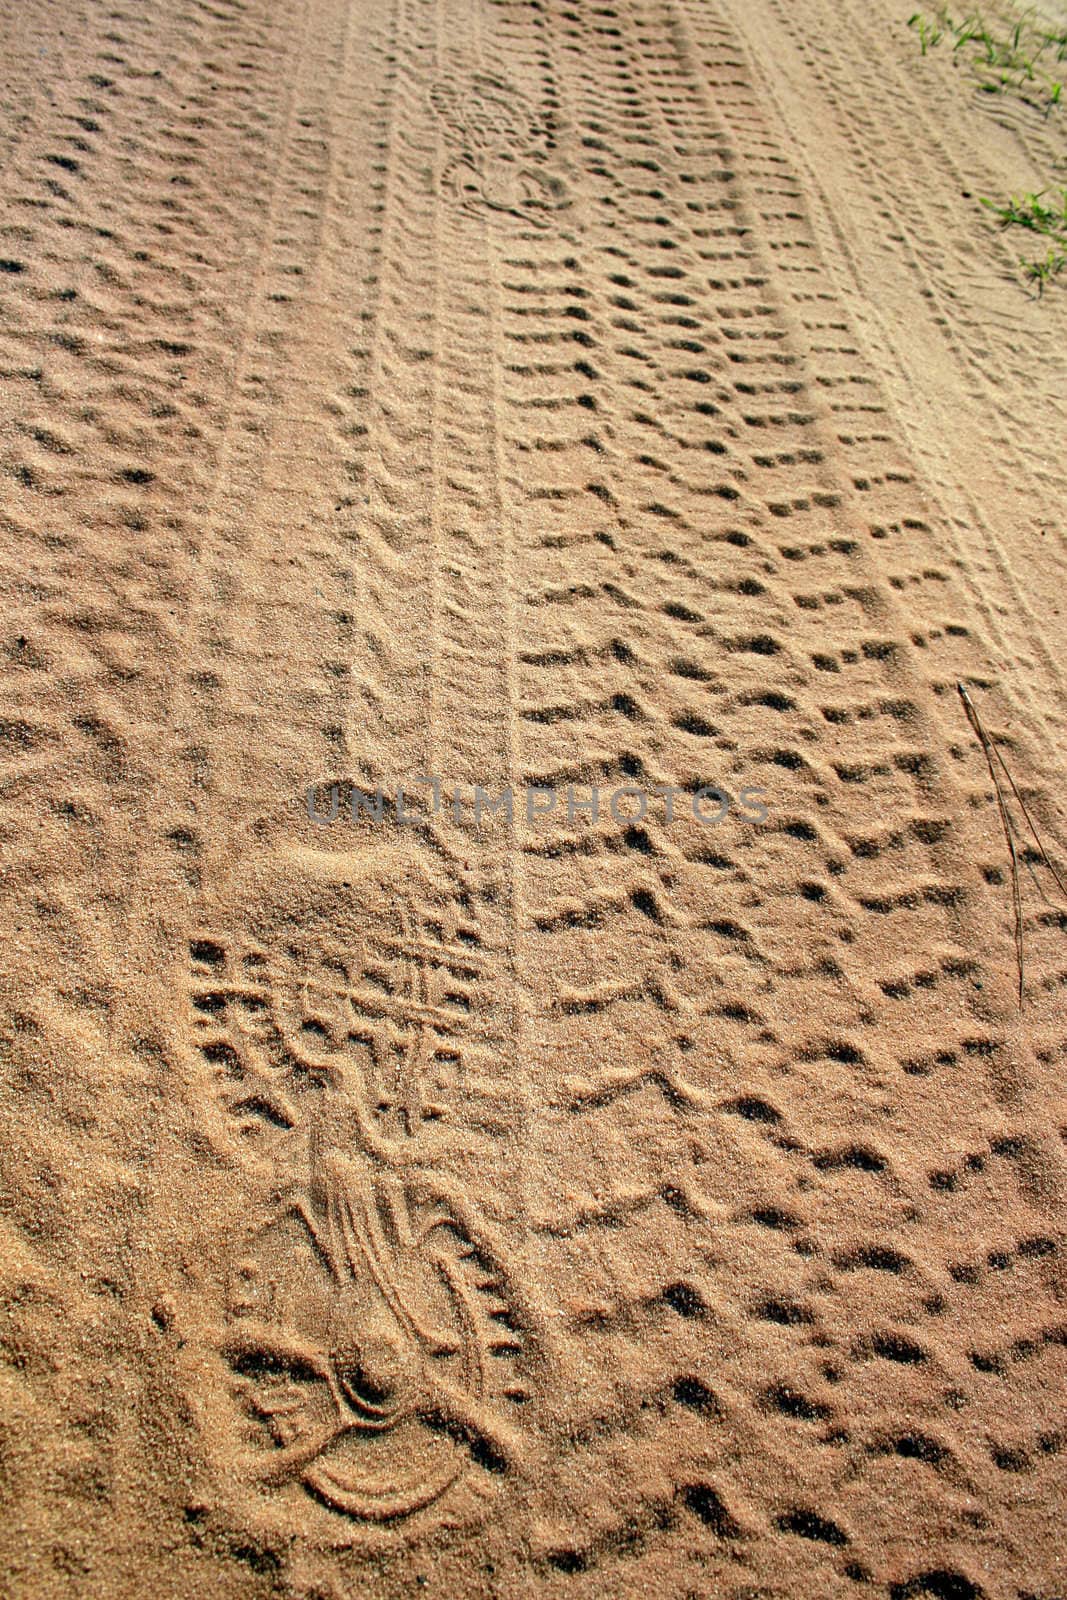 Footprints walking in the sand into the distance